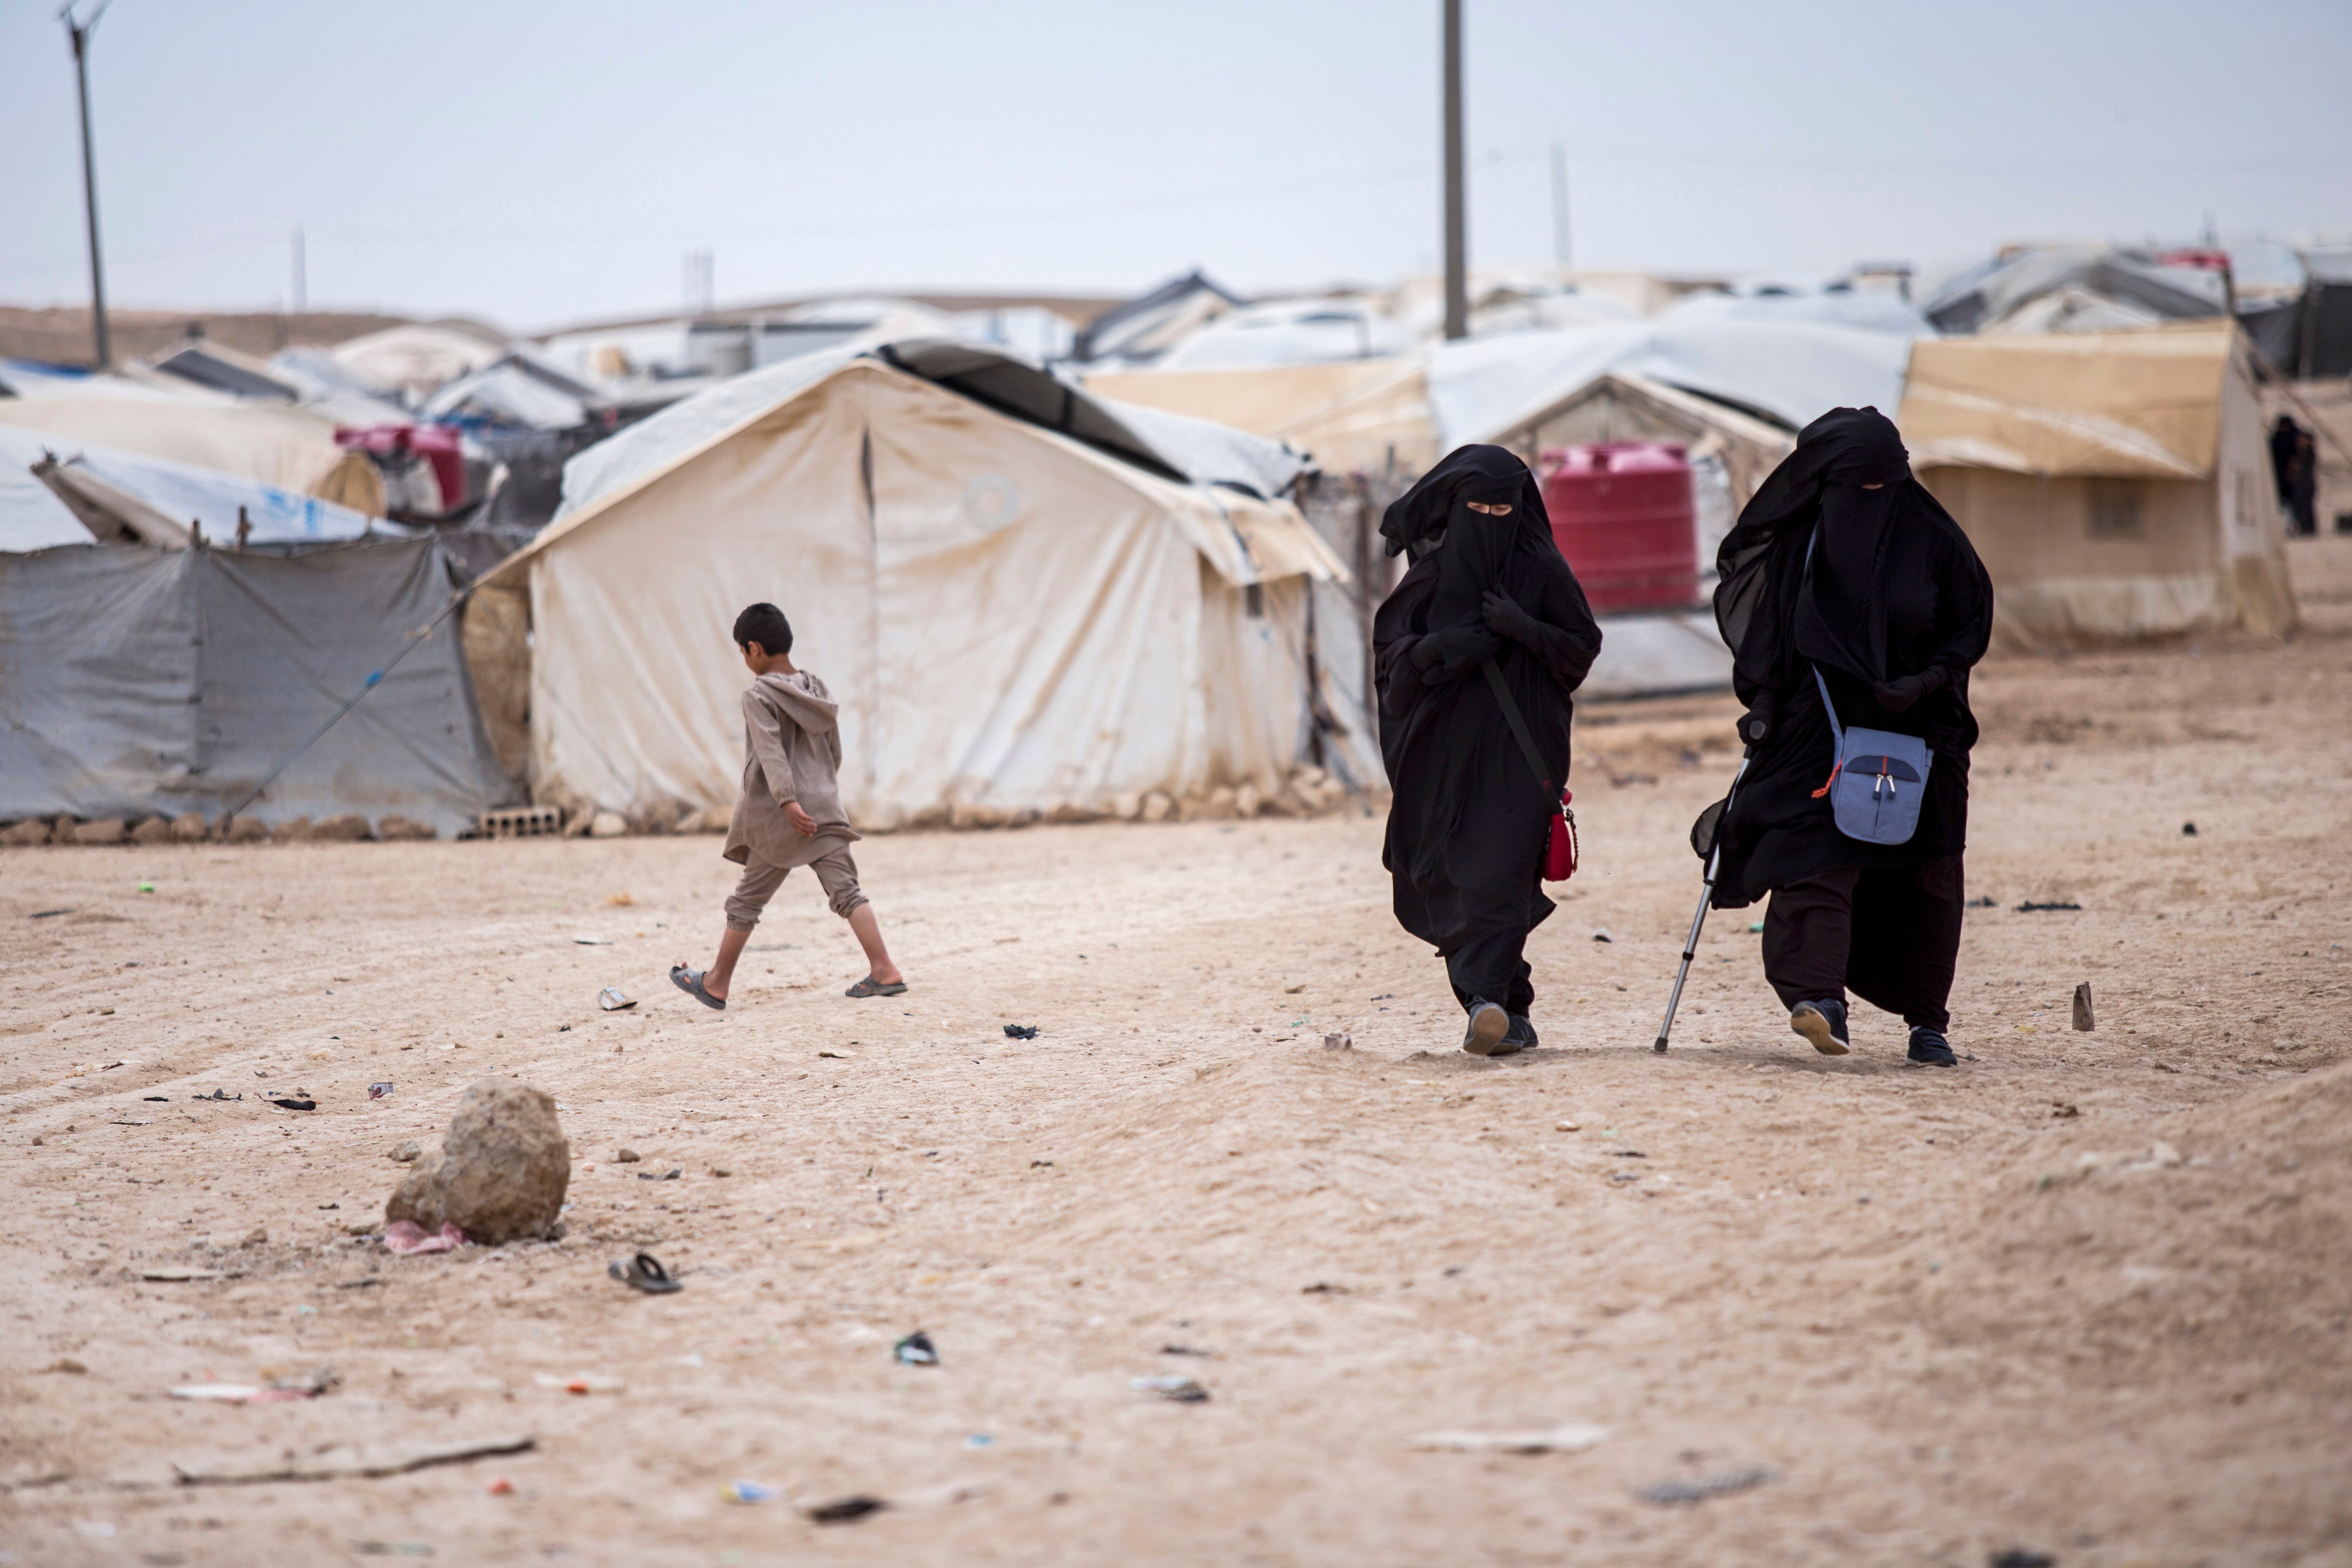 The al-hol refugee camp in northeast Syria is home to many families and supporters of Isis